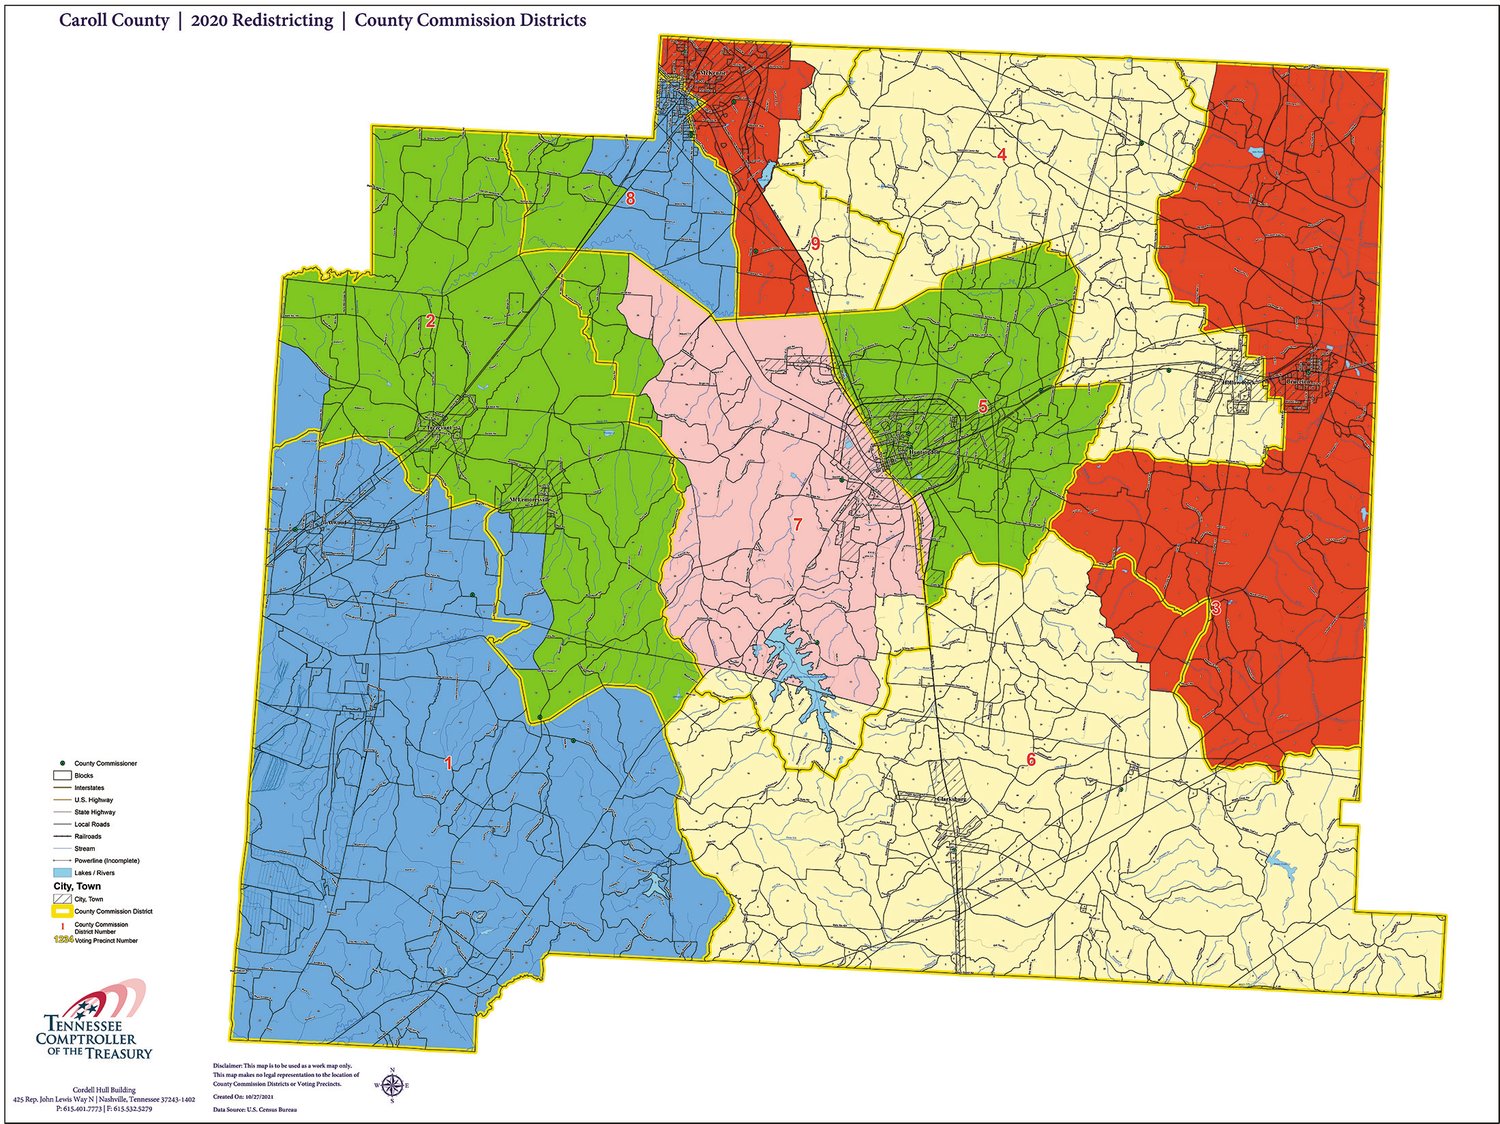 Redistricting is on November Carroll County Agenda The Mckenzie Banner